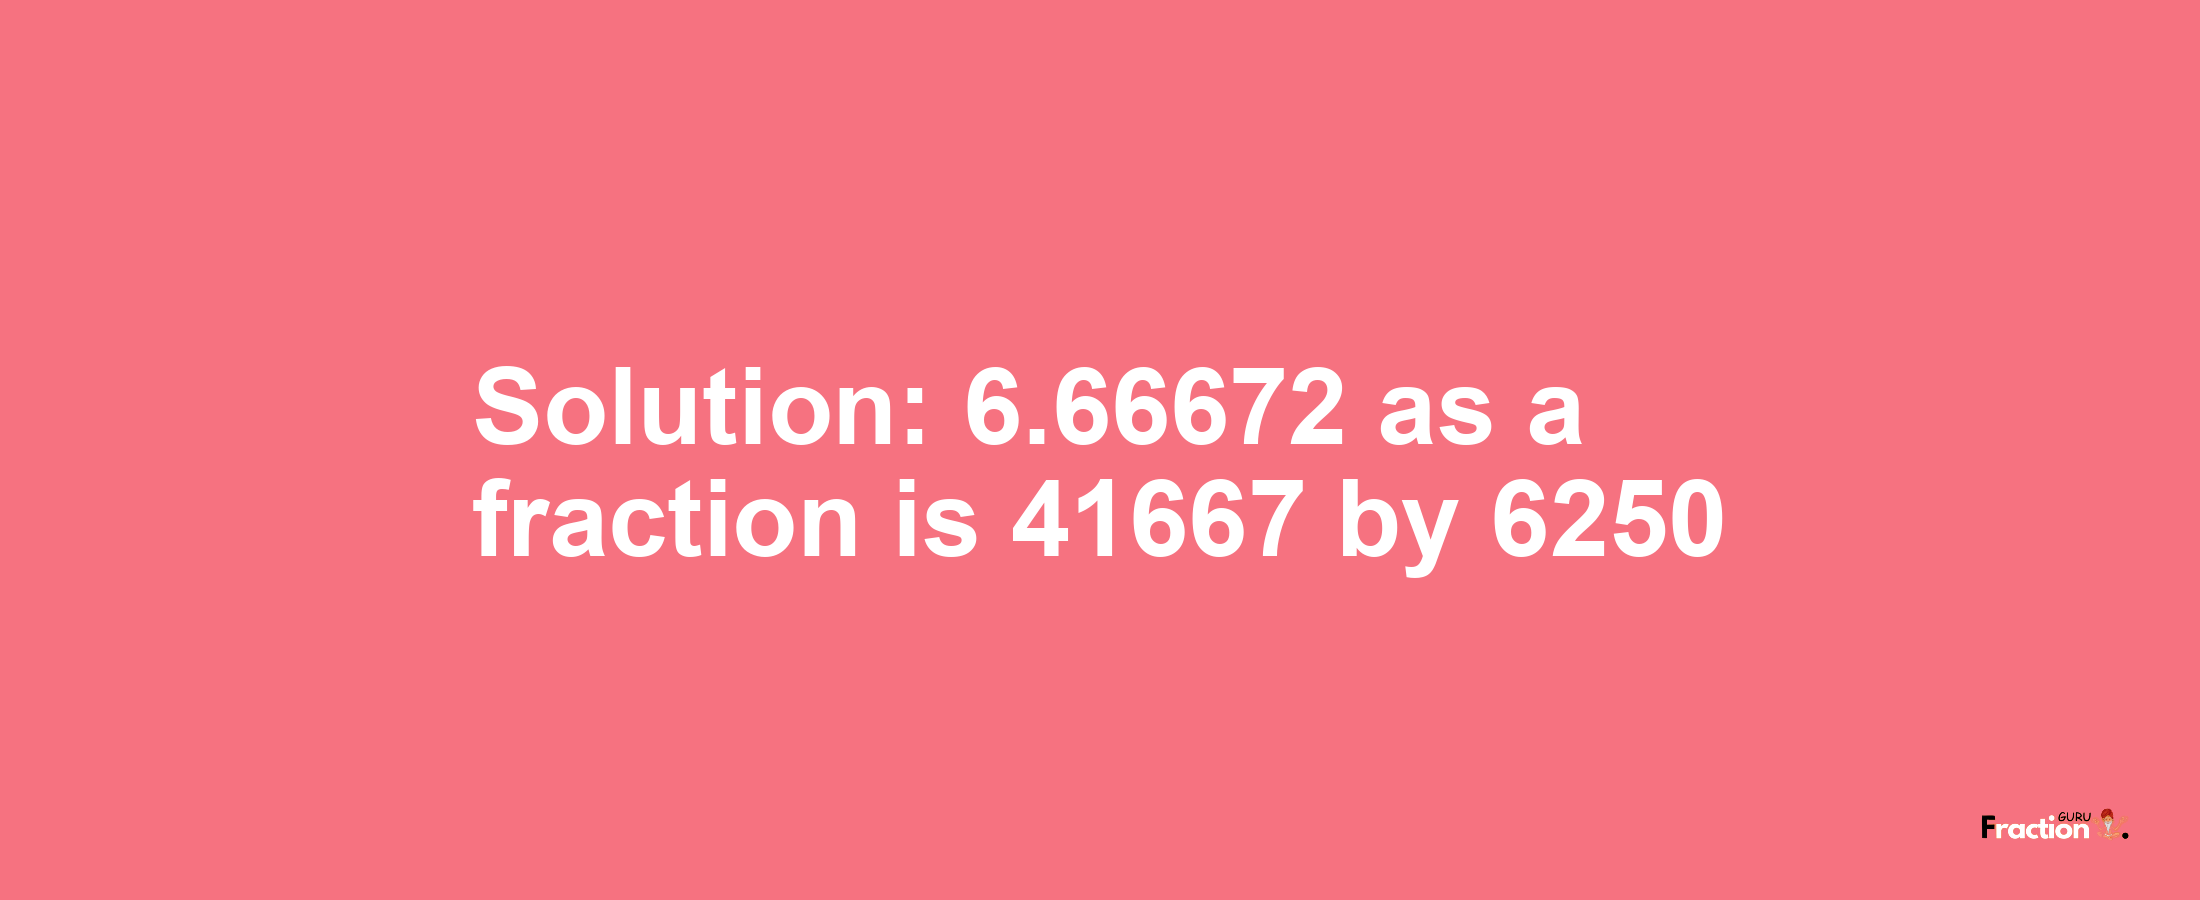 Solution:6.66672 as a fraction is 41667/6250